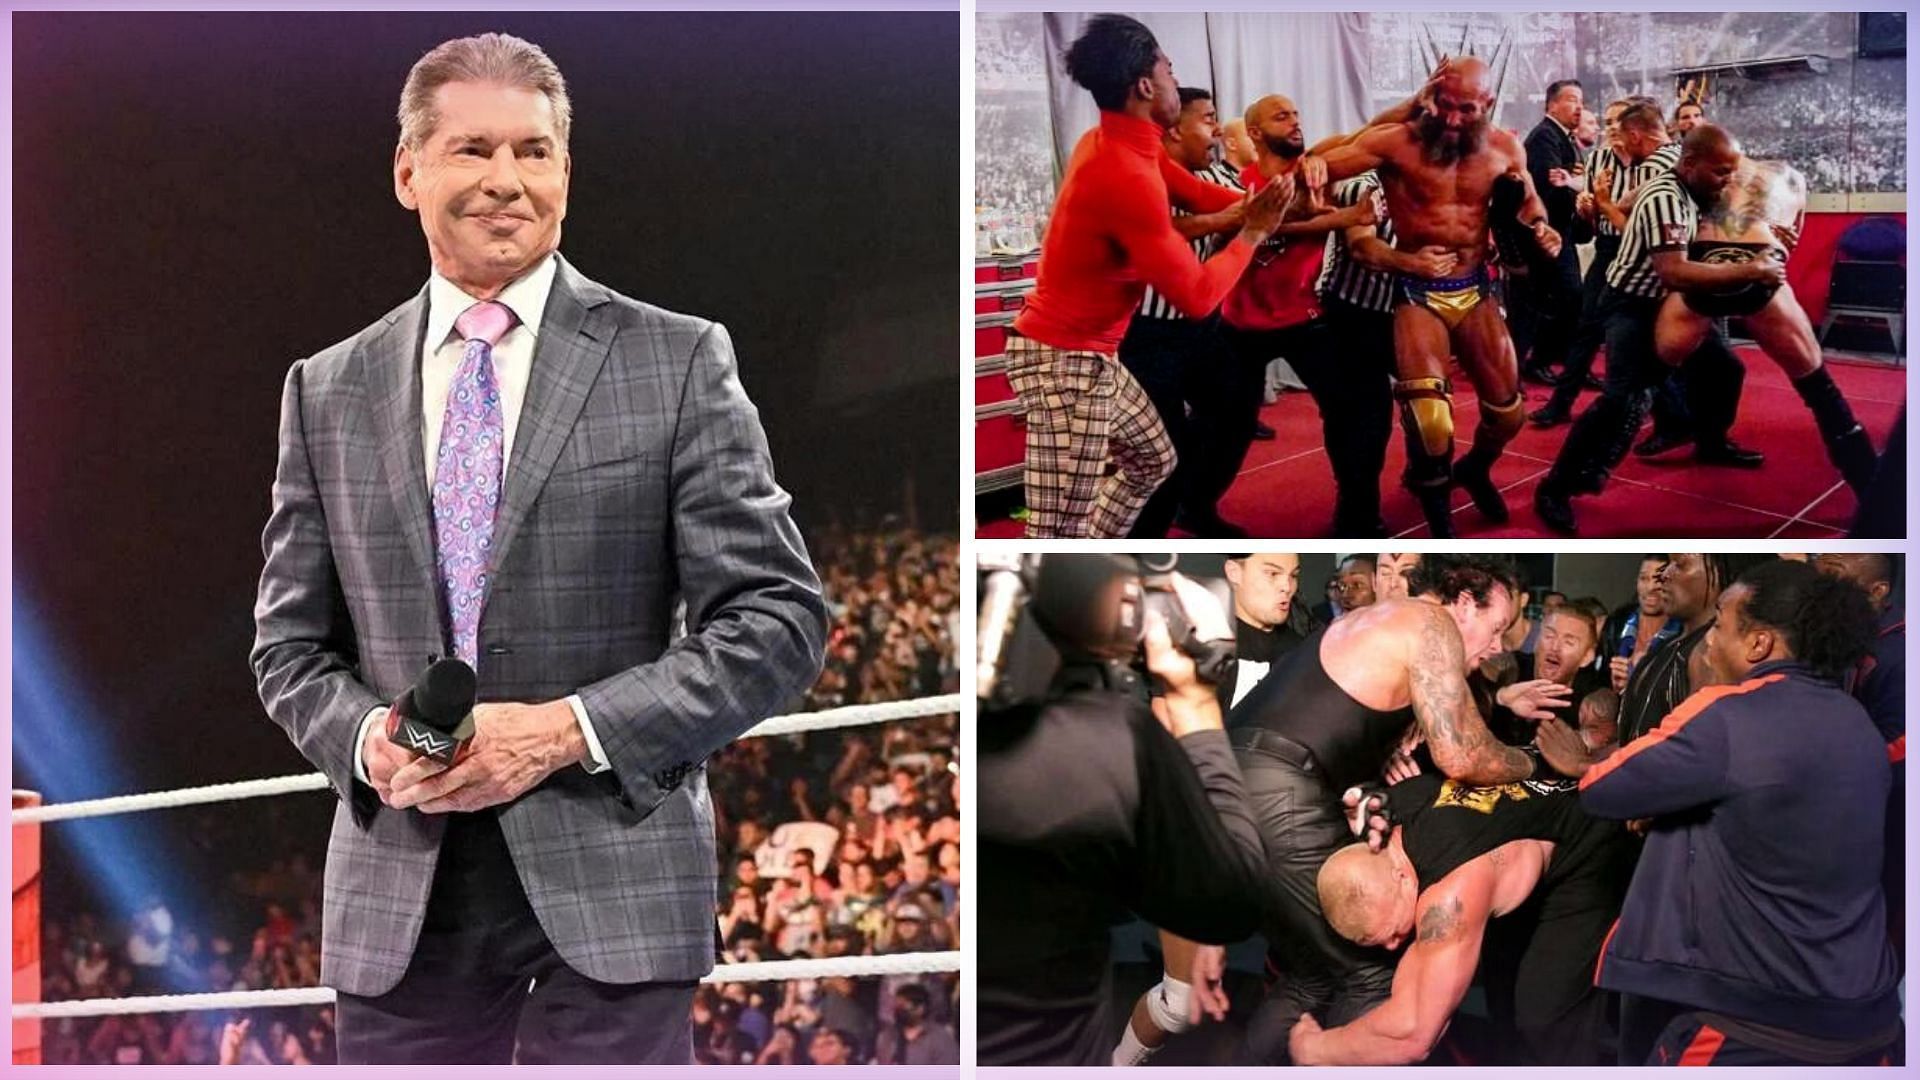 Vince McMahon planning for a WWE return this year.